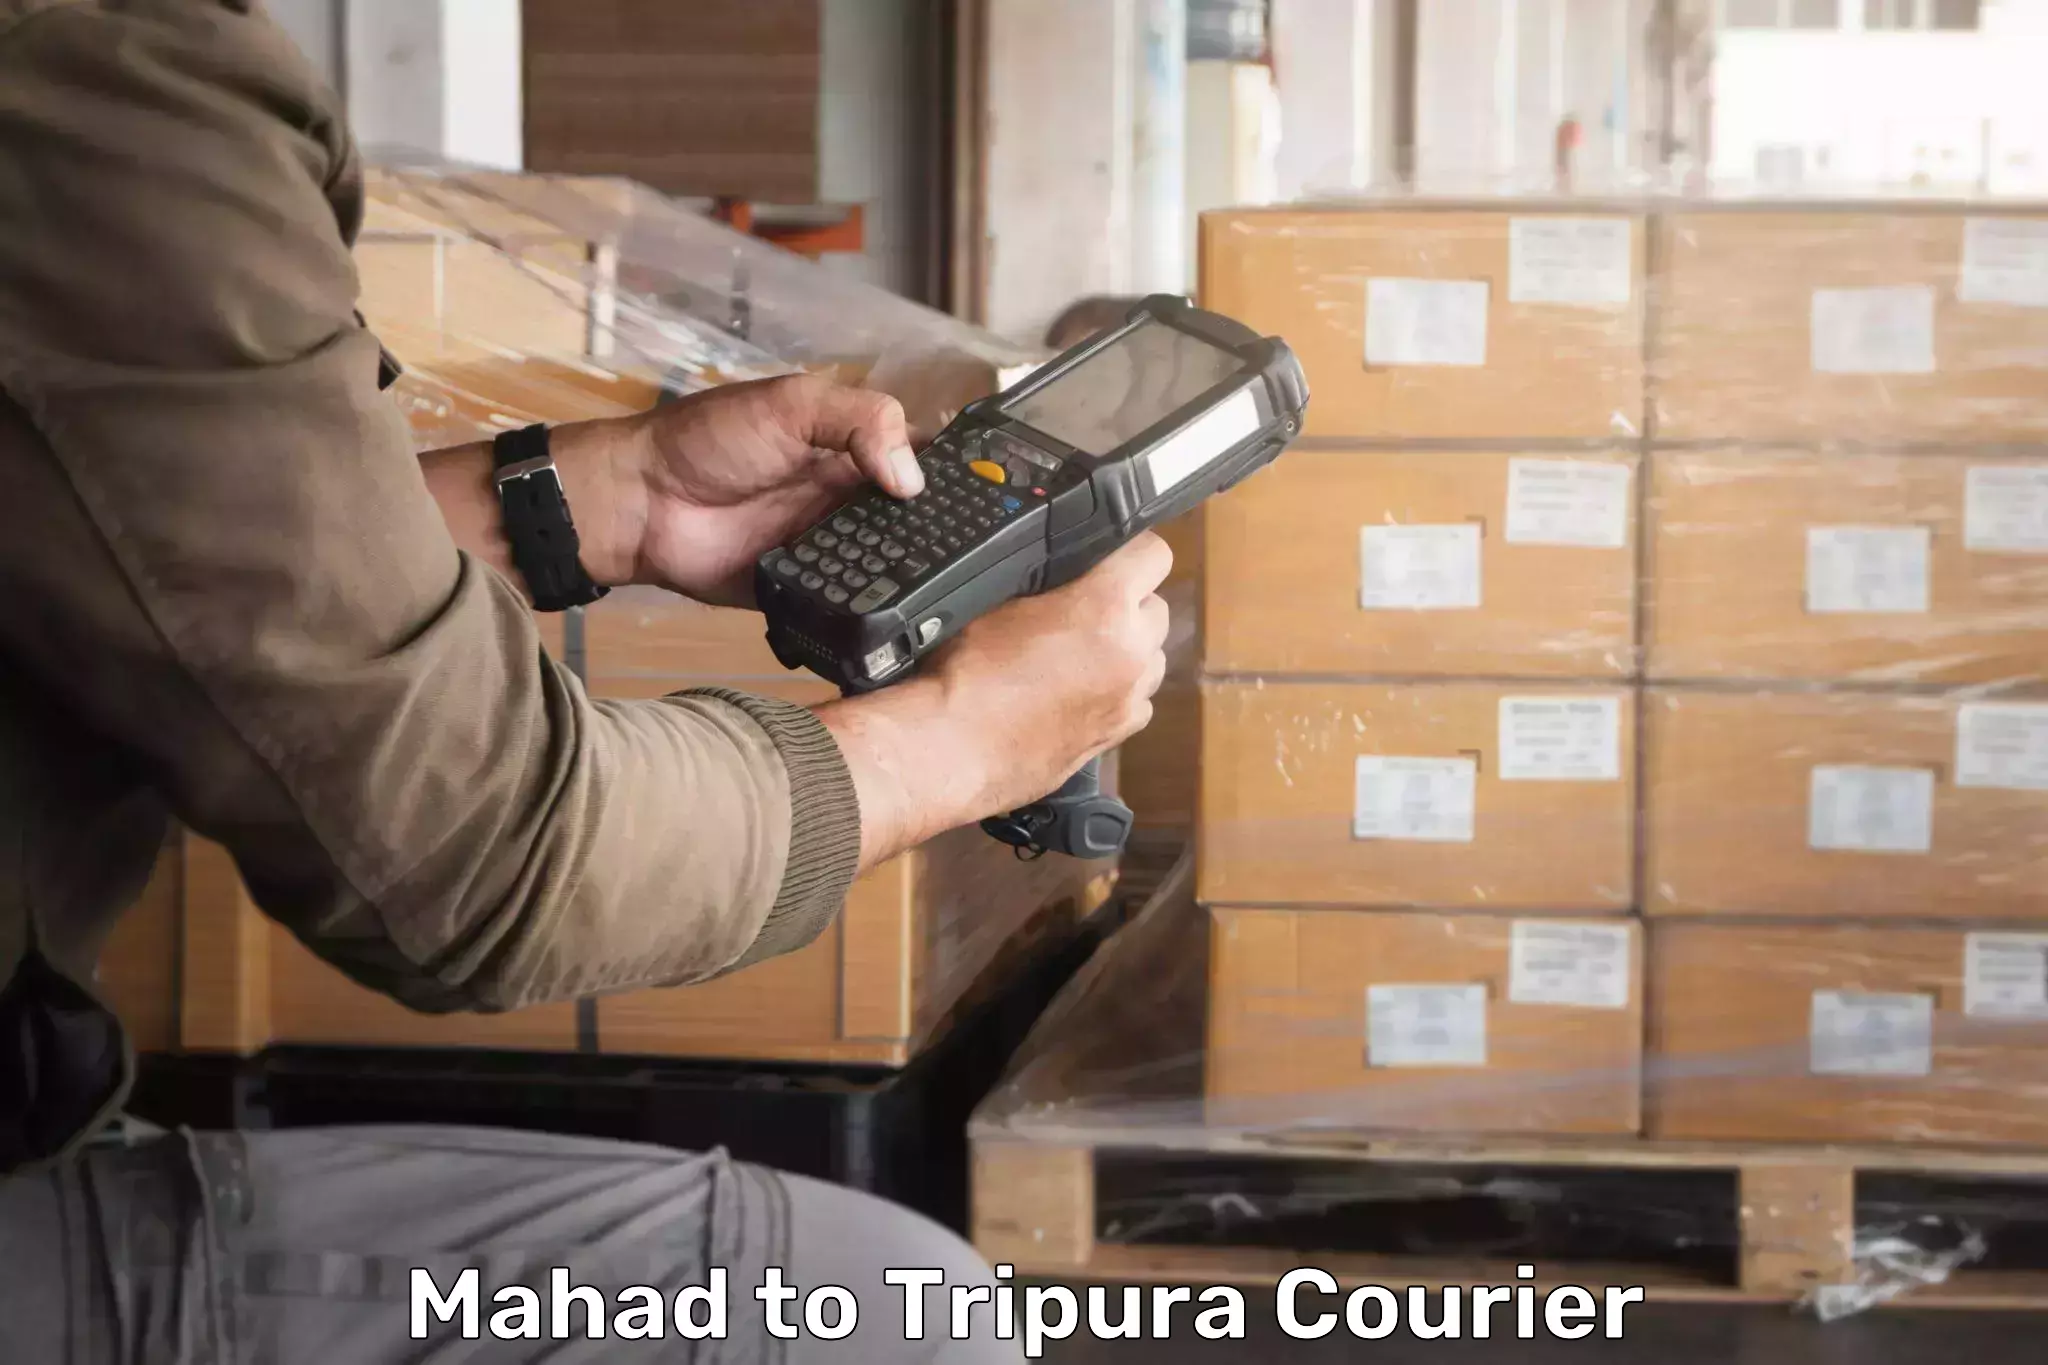 Comprehensive delivery network Mahad to Udaipur Tripura